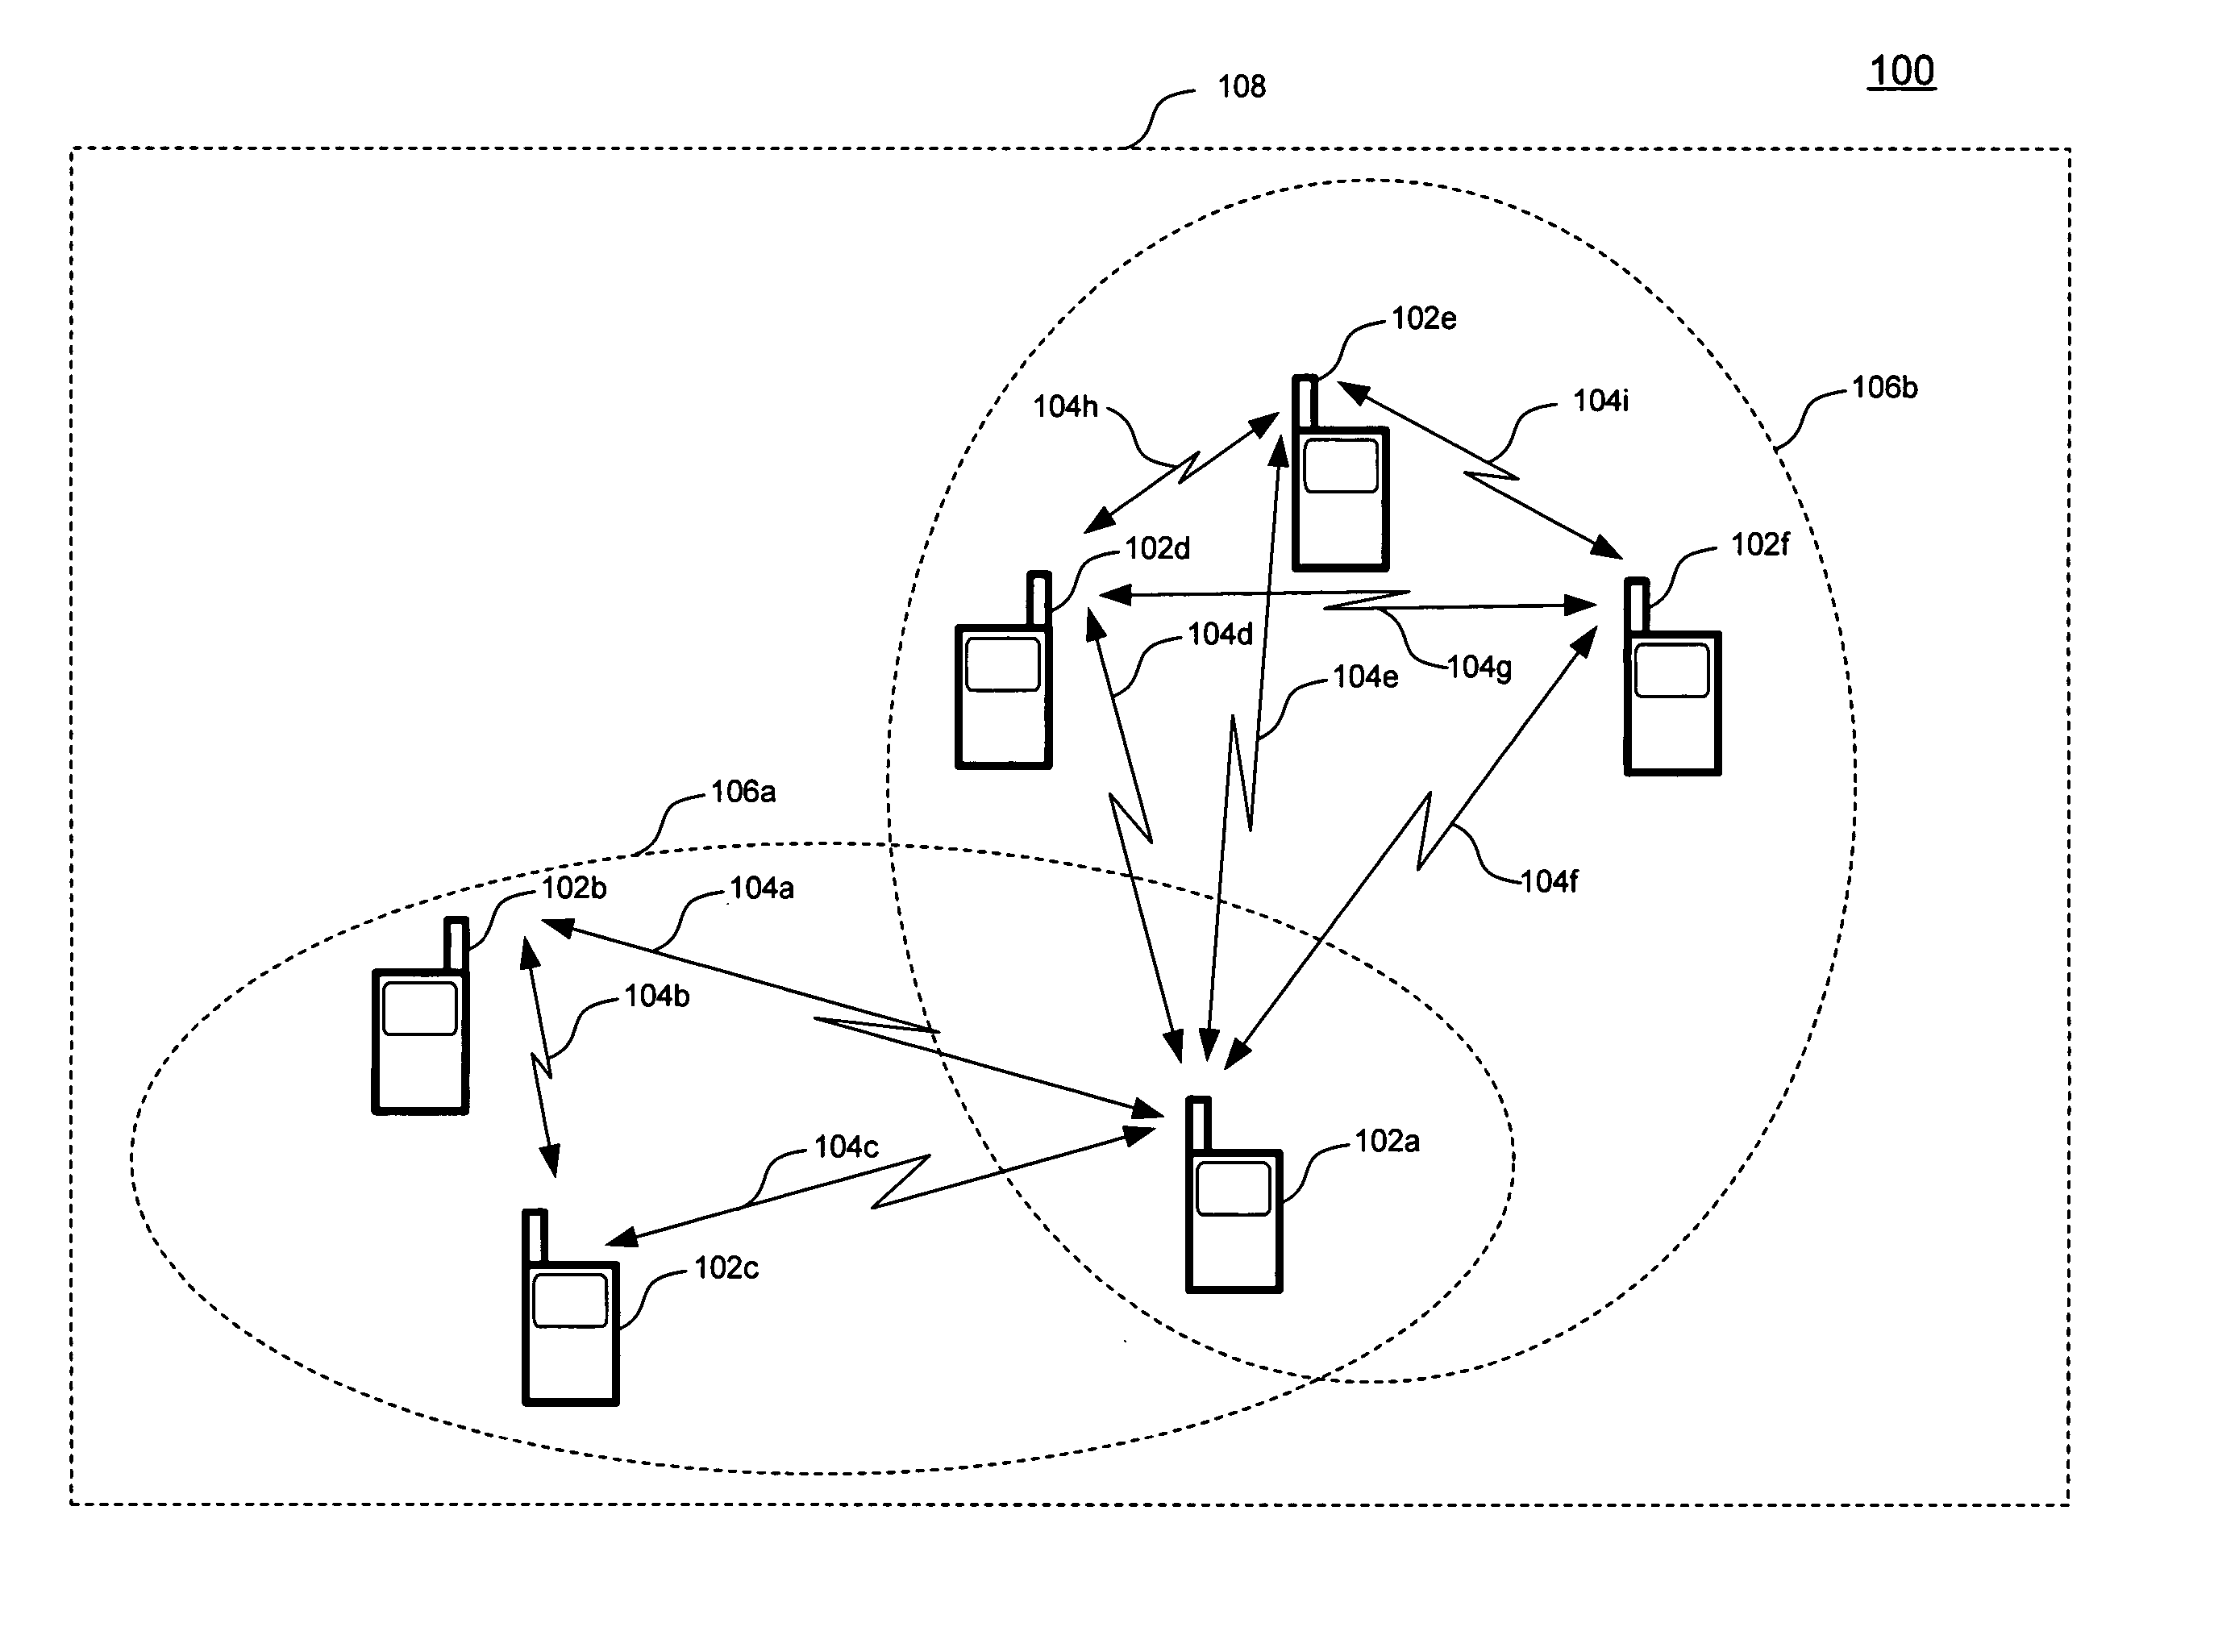 Adaptive beacon period in a distributed network